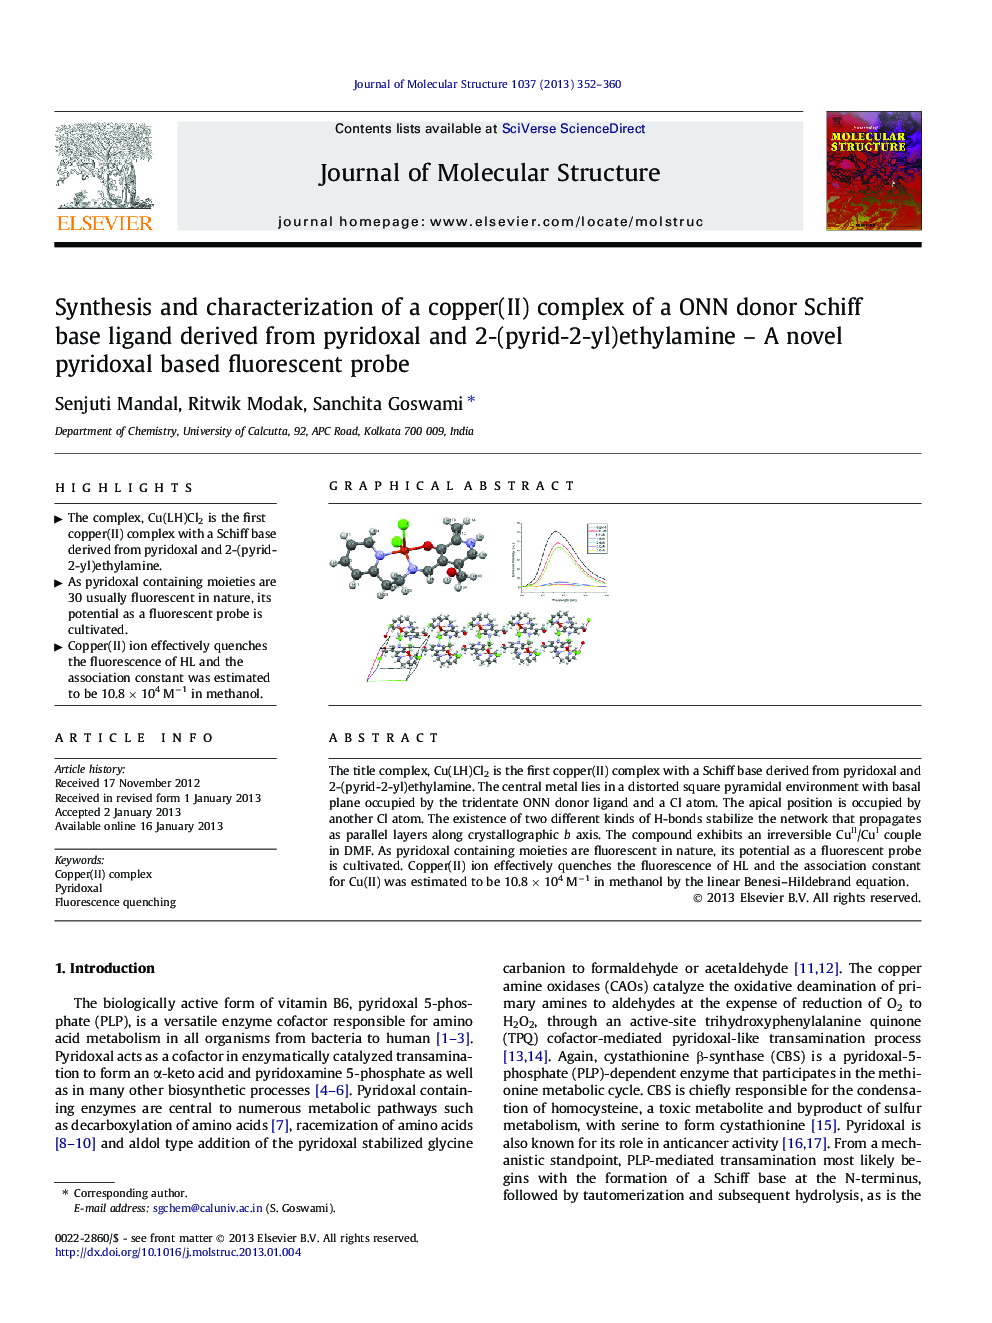 Synthesis and characterization of a copper(II) complex of a ONN donor Schiff base ligand derived from pyridoxal and 2-(pyrid-2-yl)ethylamine – A novel pyridoxal based fluorescent probe